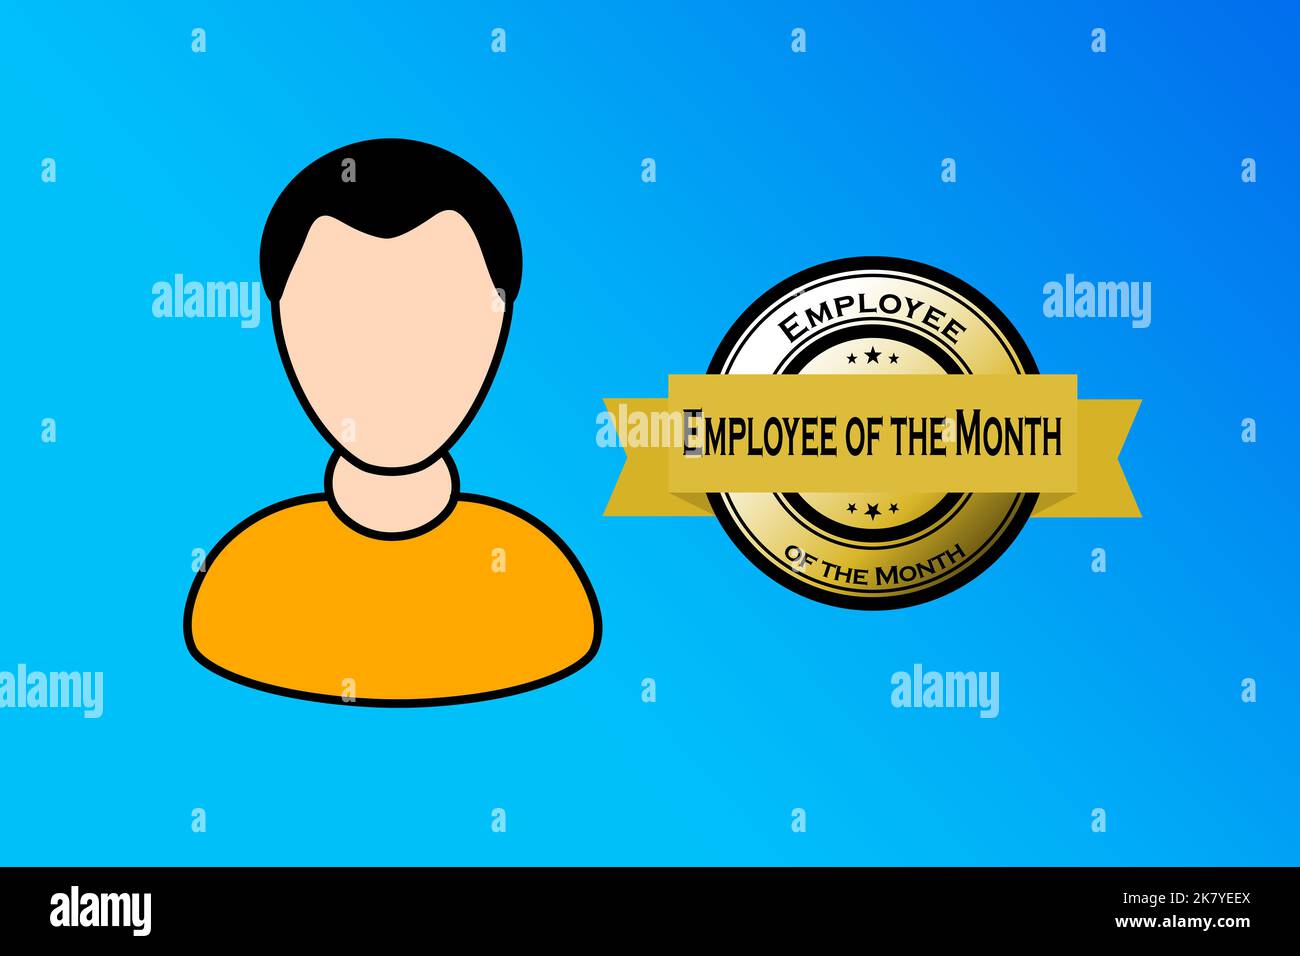 Employee of the month. Avatar of a person and award style stamp with a ribbon. Stock Photo